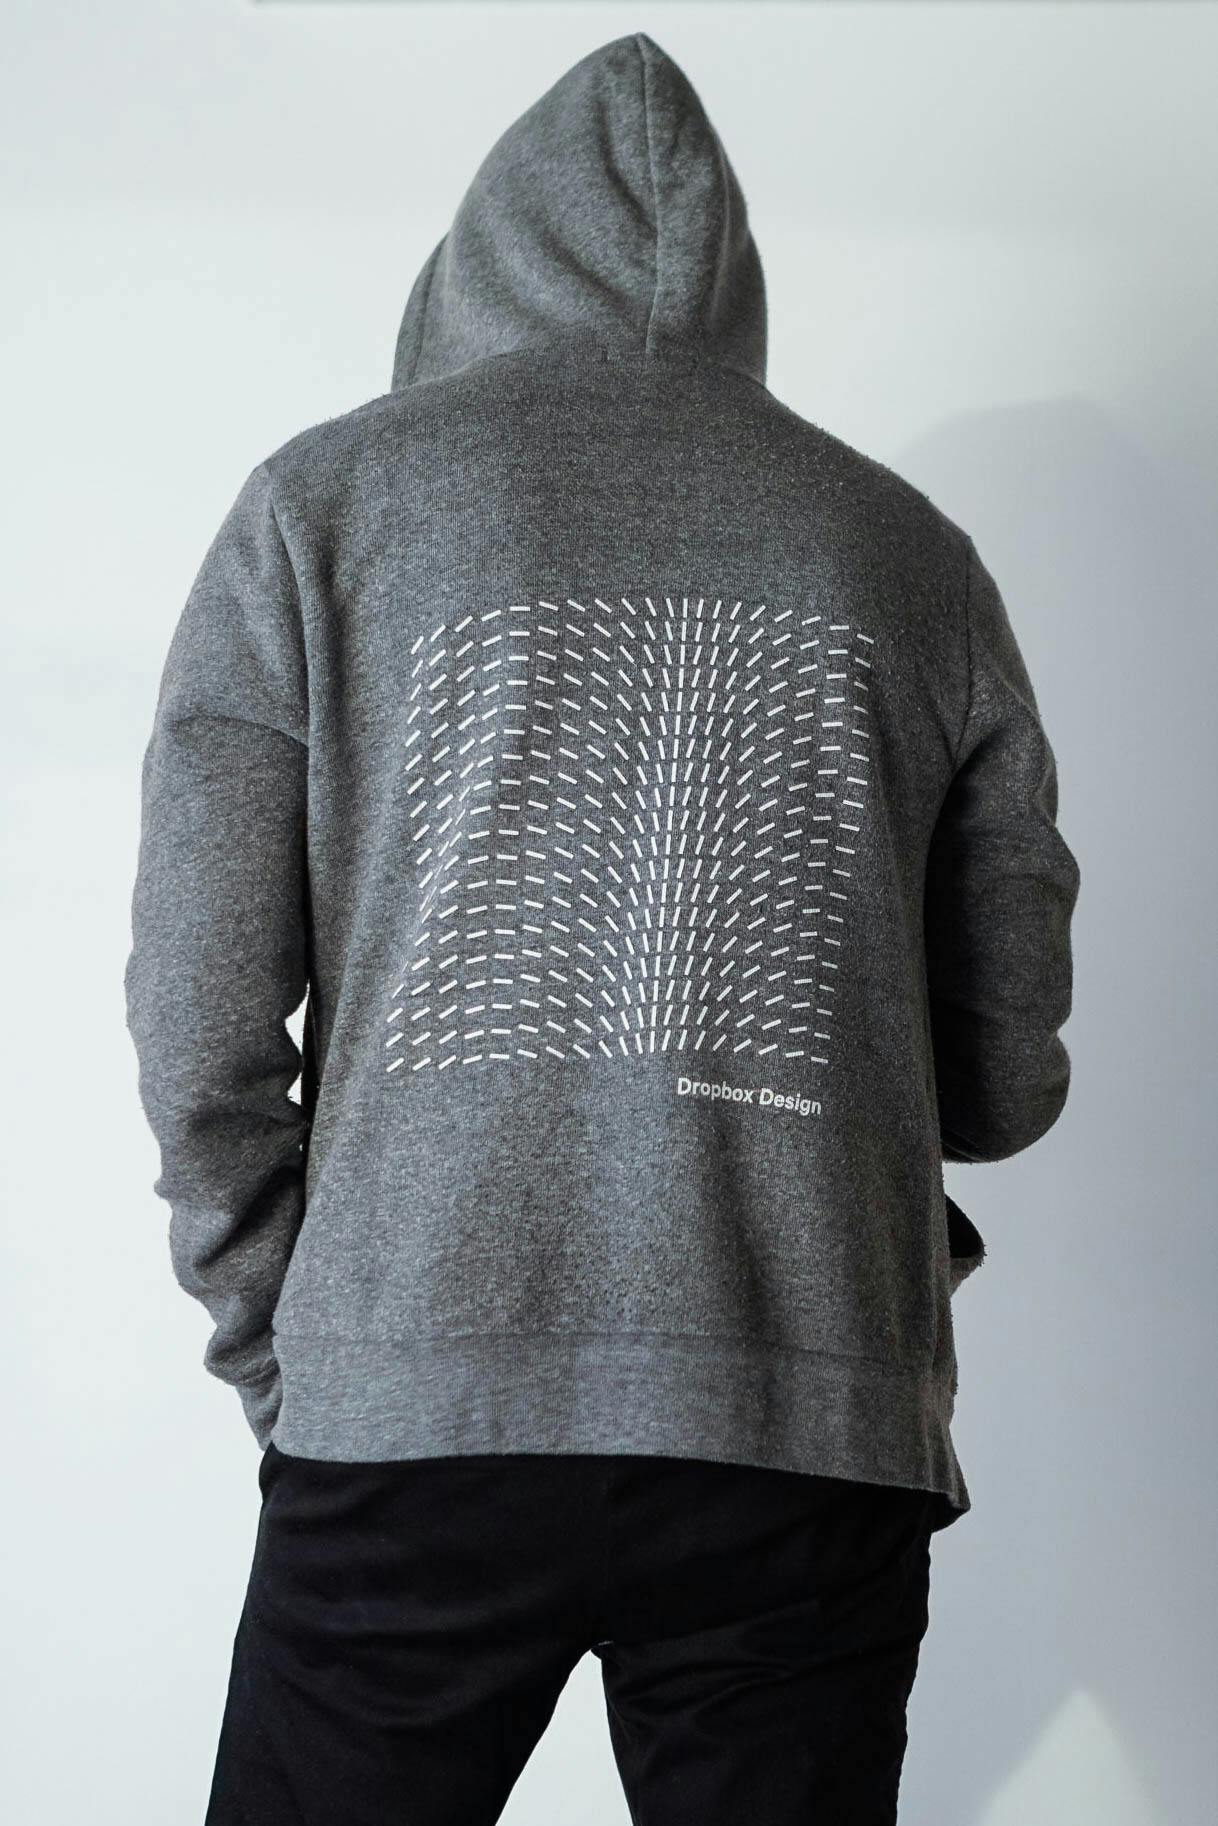 A Dropbox Design sweatshirt with some abstract, geometric art on the back